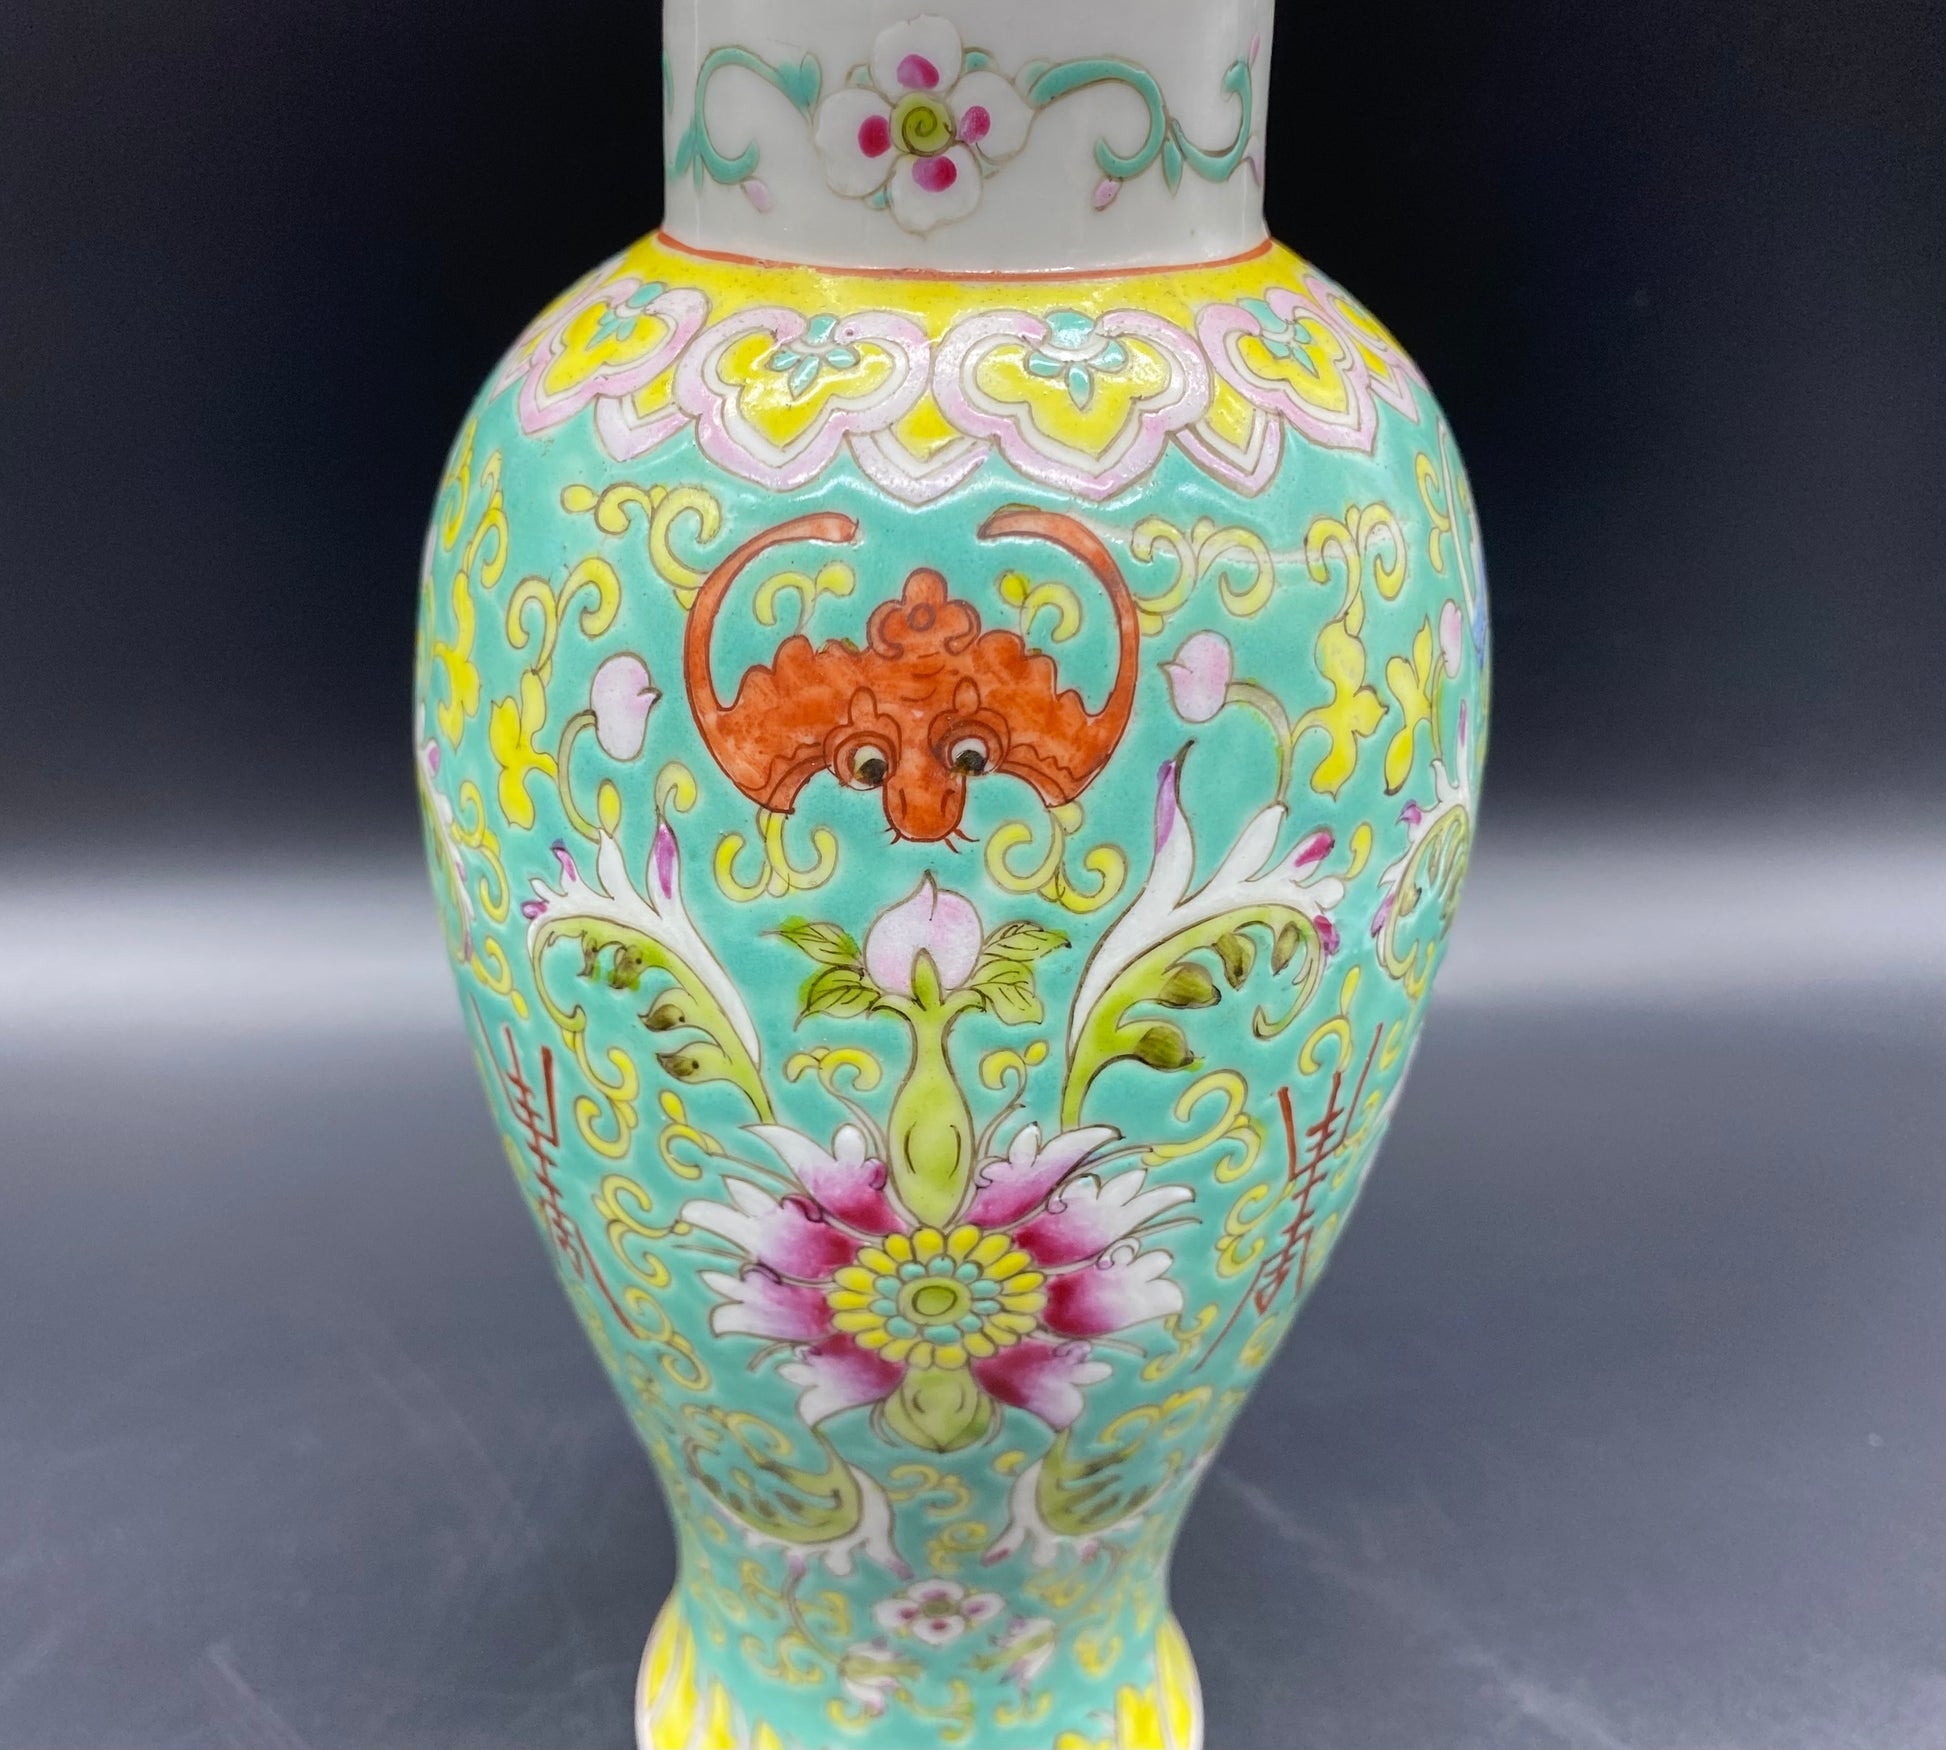 A Really Nice Antique Chinese 19th Century  Guangux Famille June Porcelain Vase